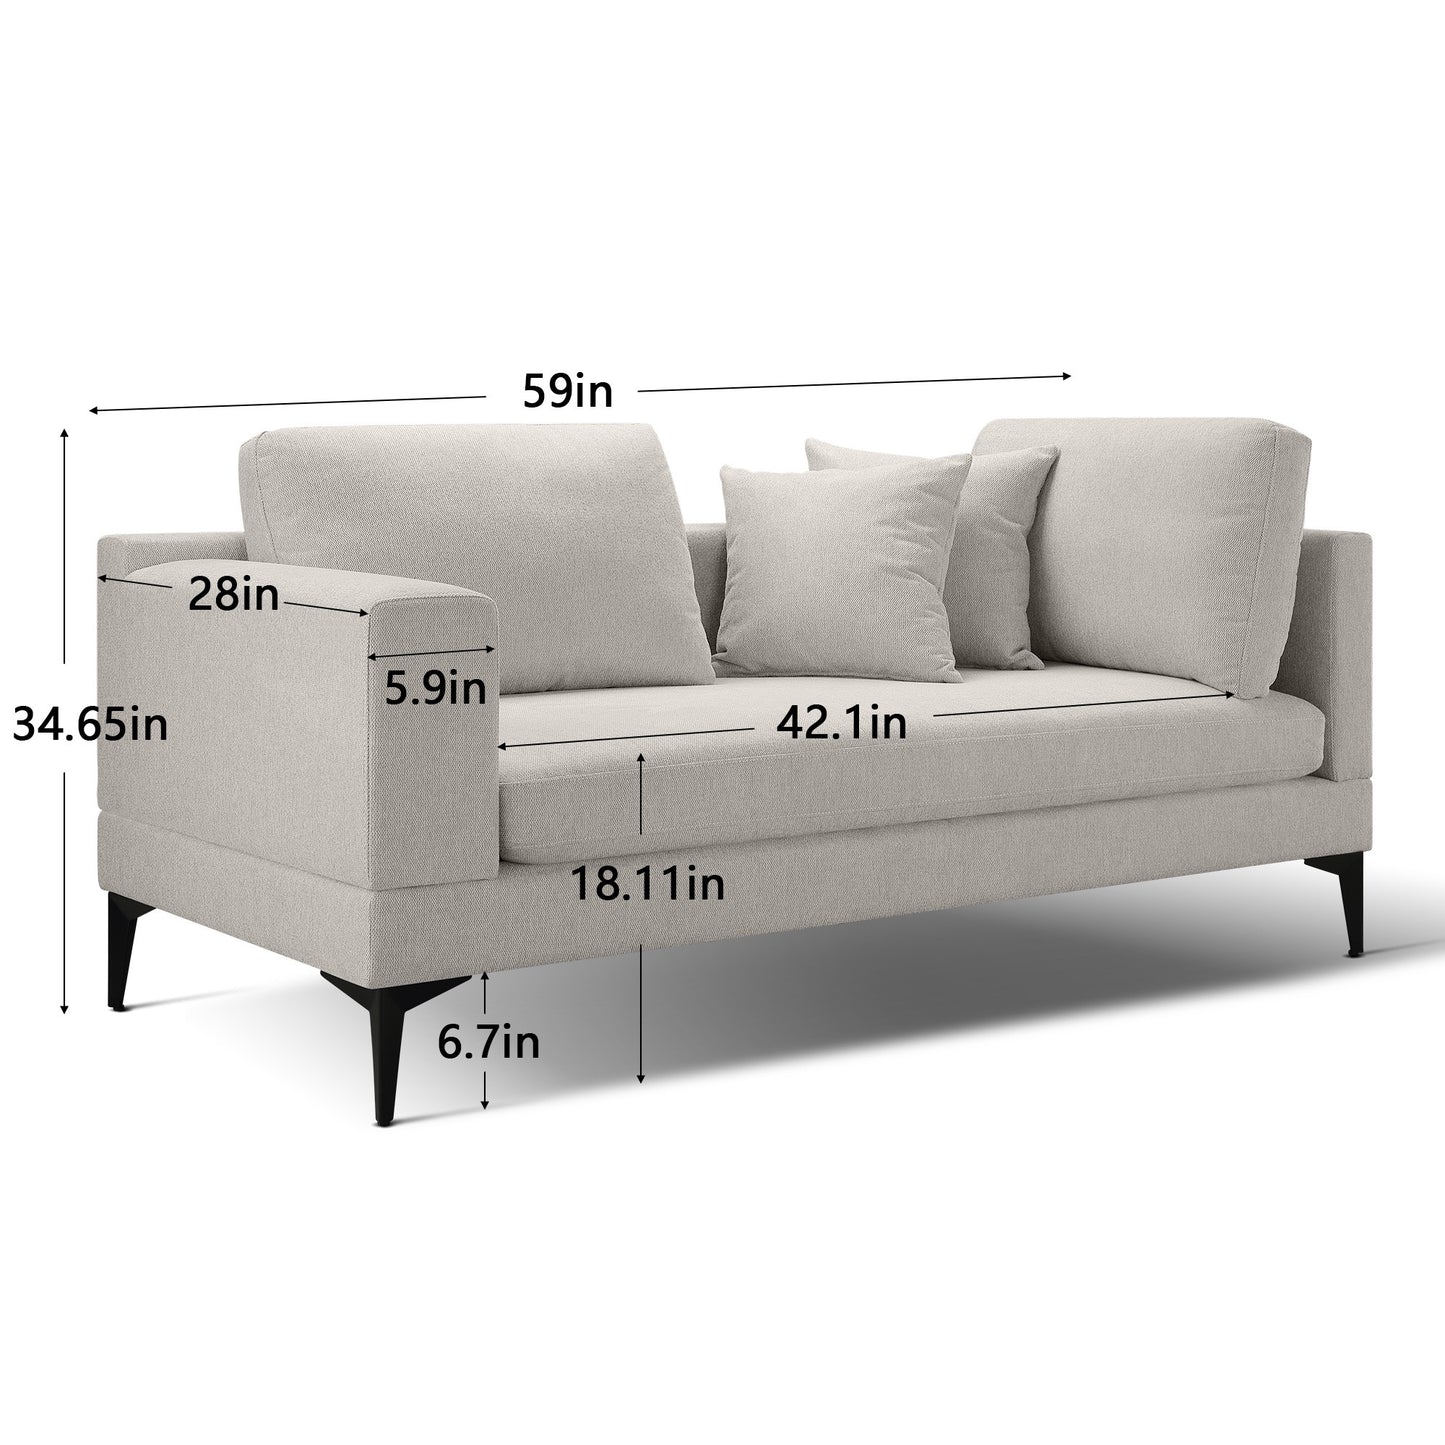 Champagne Luxury Modern 2 Seater Couch Reversible Arms + Metal Leg Accents + 2 Accent Pillows